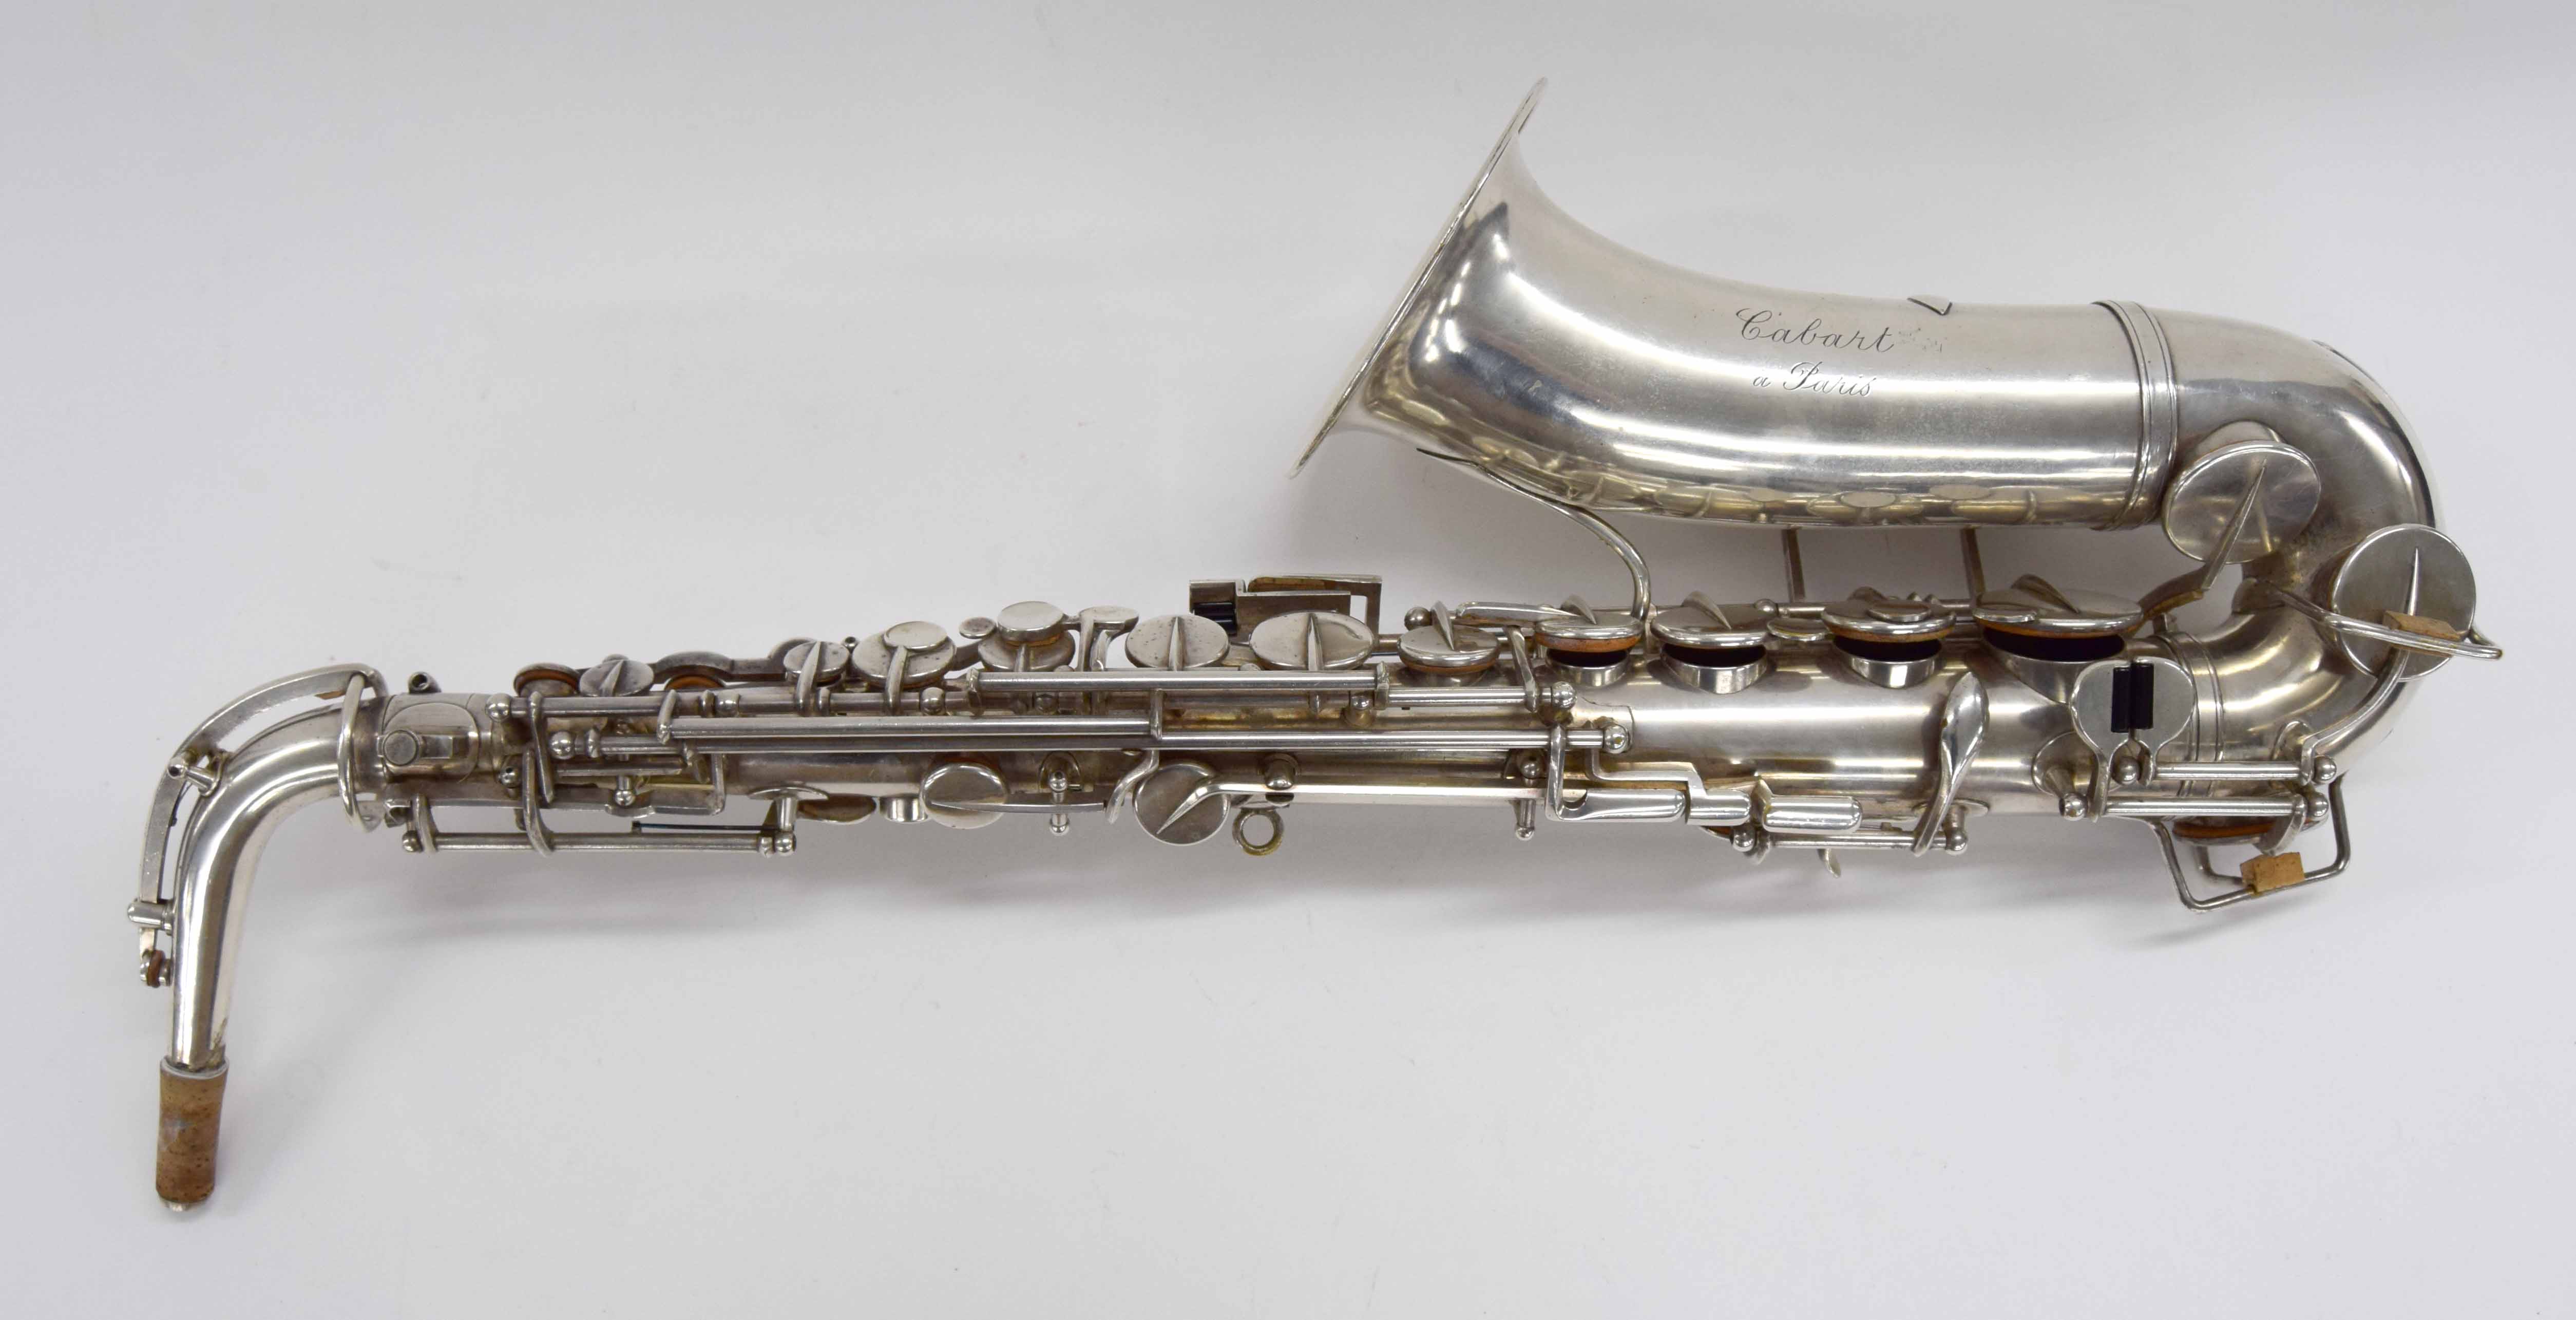 French silver plated alto saxophone by and inscribed Cabart á Paris, cased (with ligature and